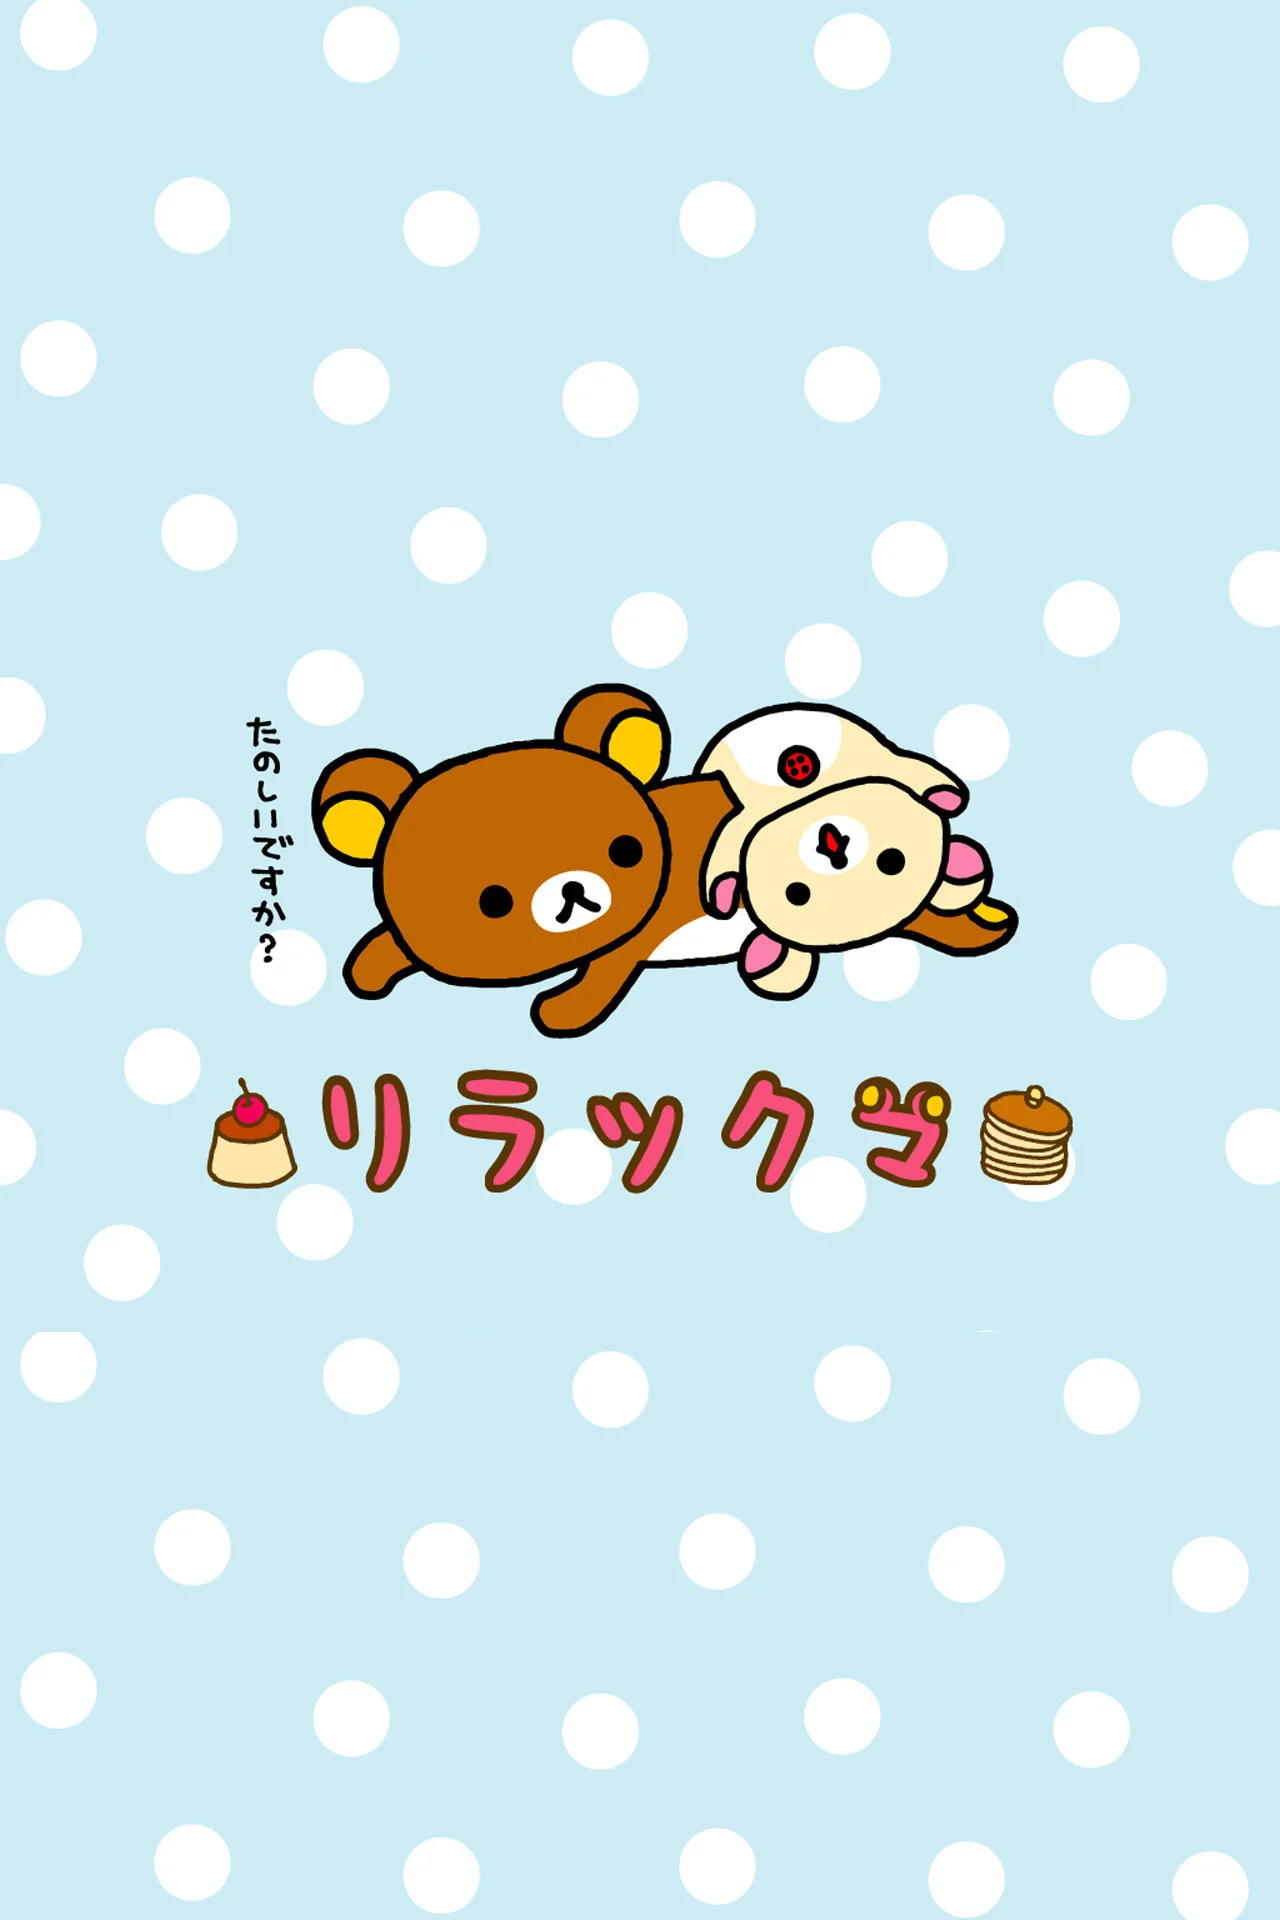 Rilakkuma Wallpapers | Free for iPhone and Galaxy from Lollimobile